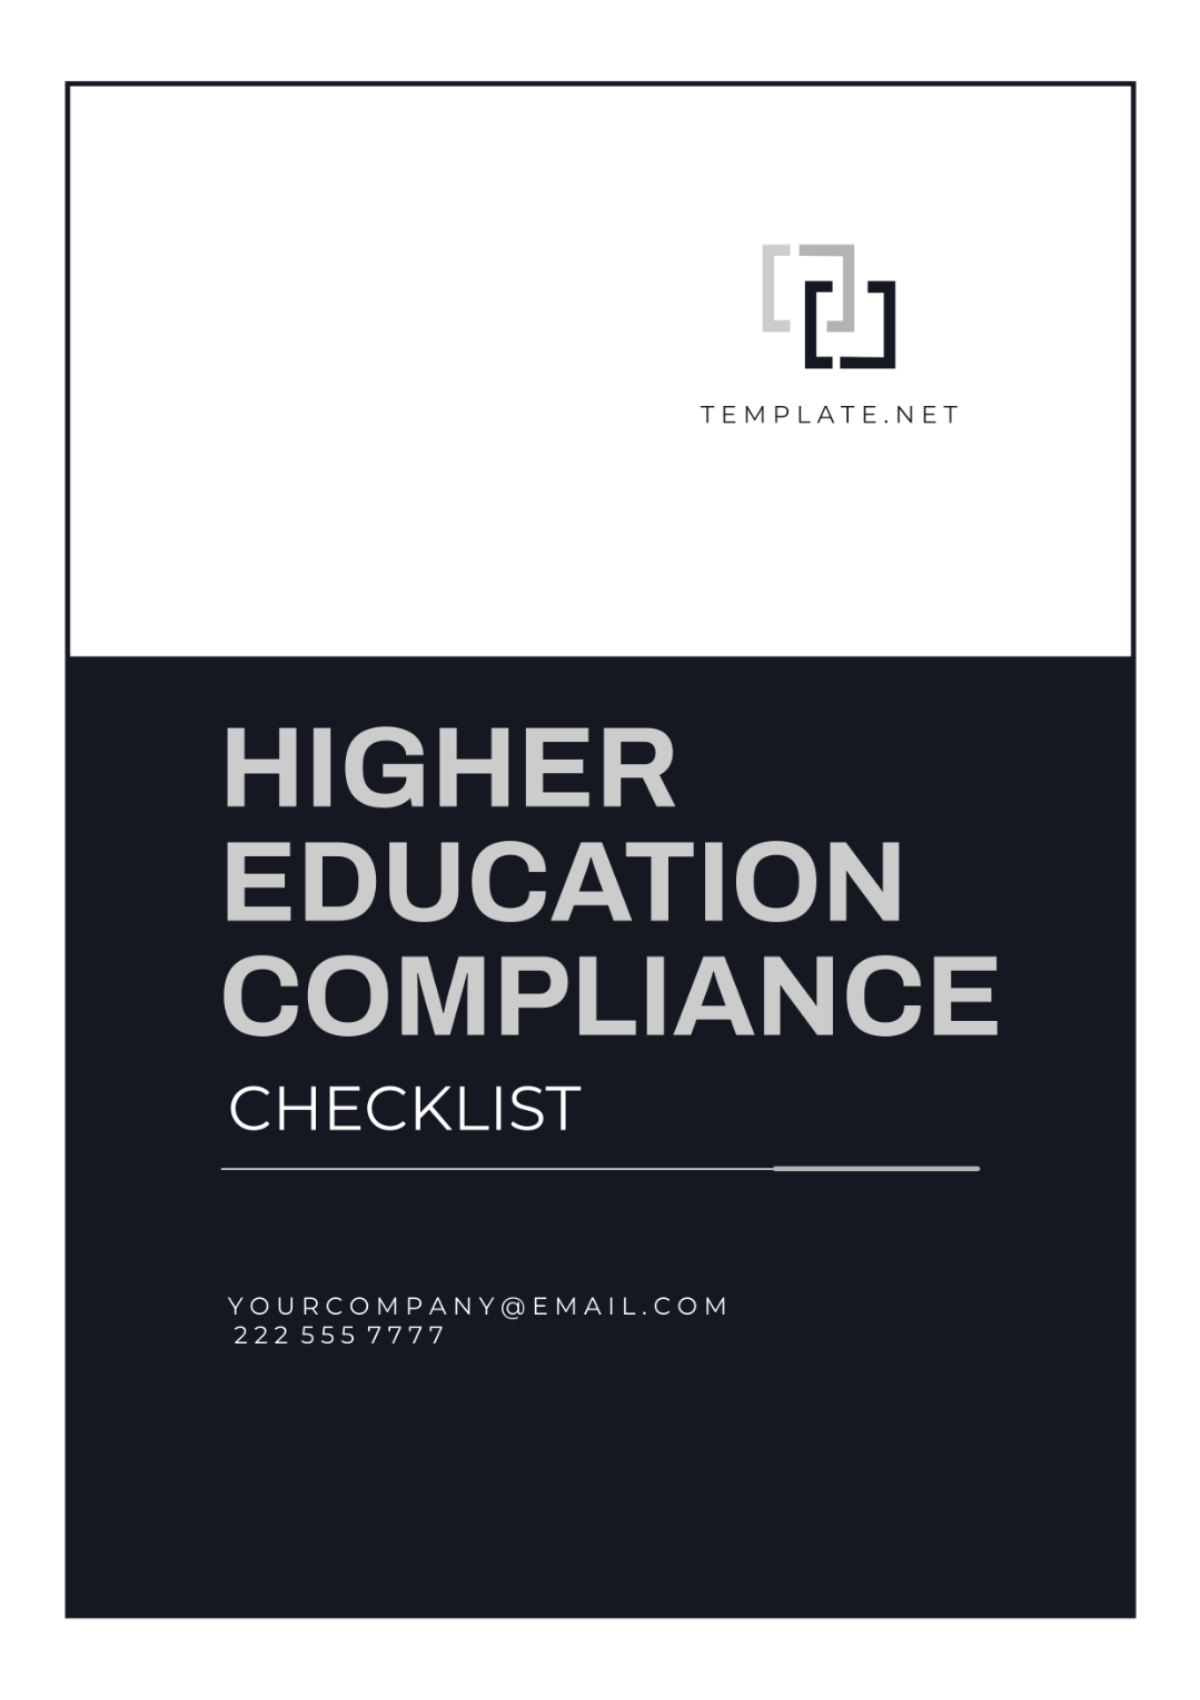 Higher Education Compliance Checklist Template